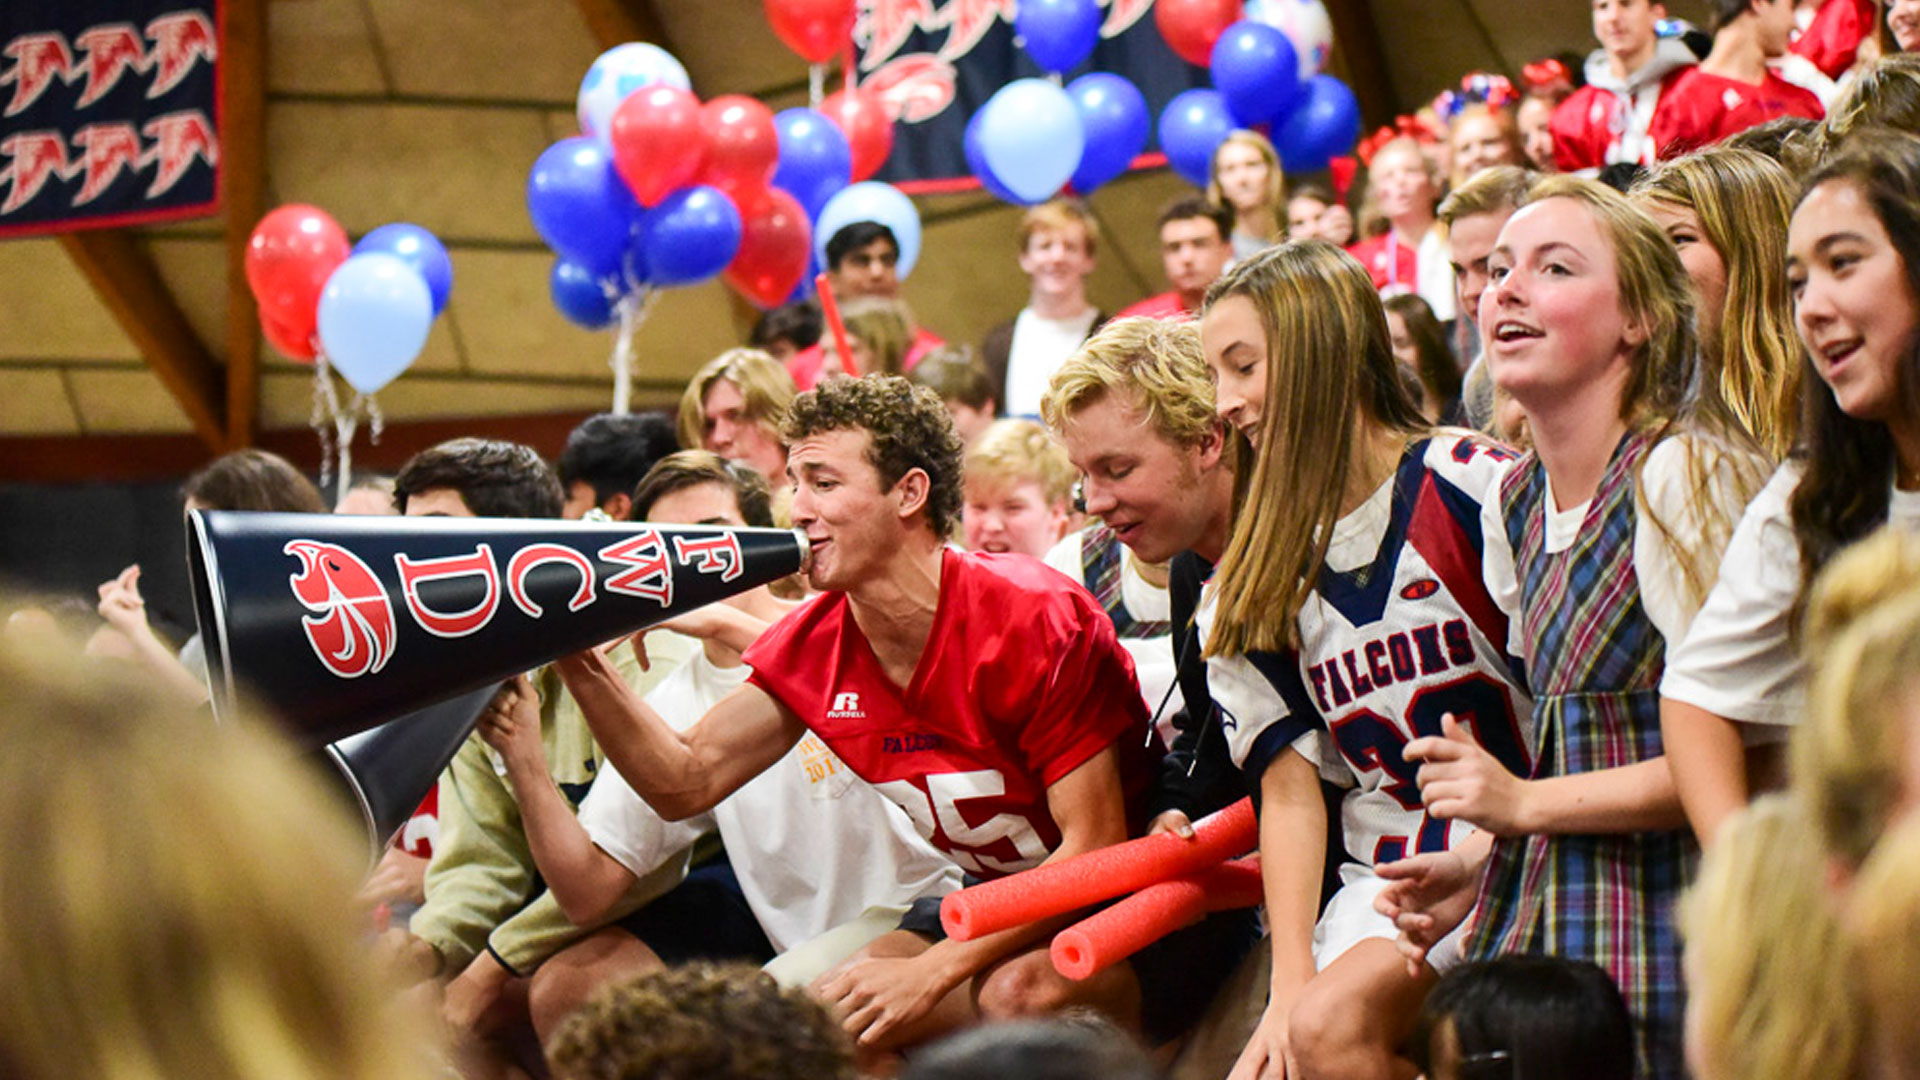 Cheer squad fosters spirit for fans, players, Sports